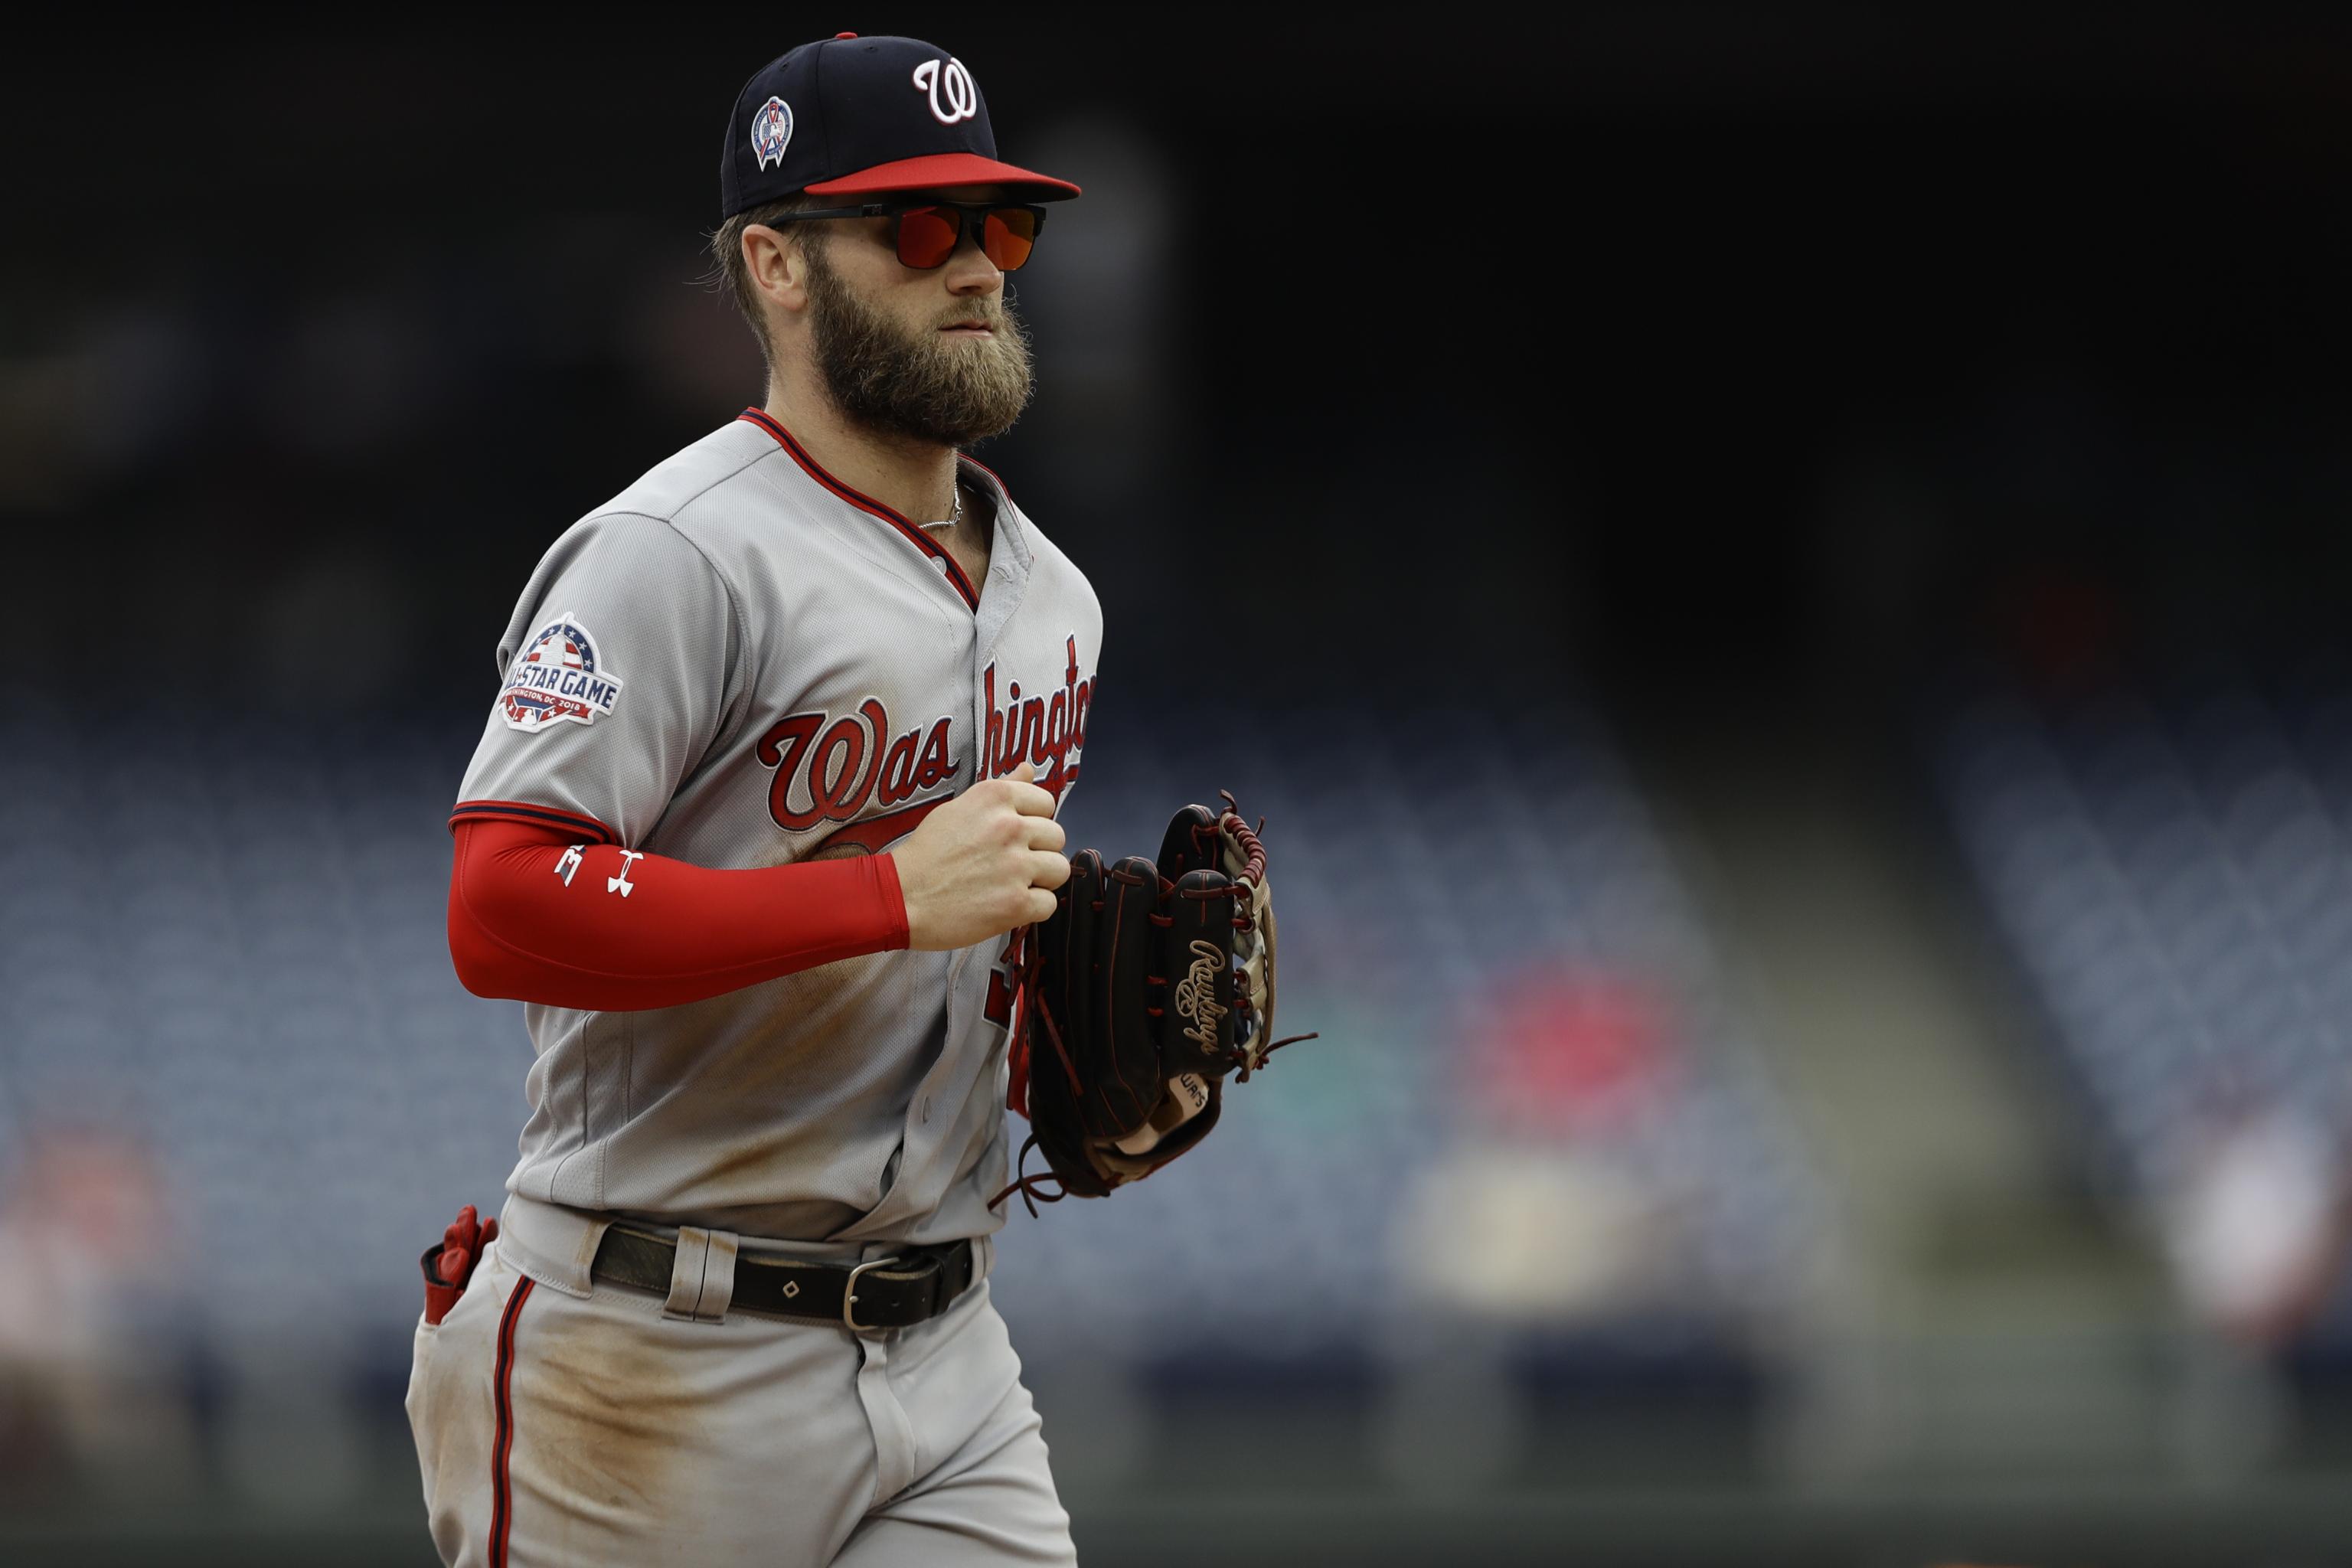 Bryce Harper reminds Yankees prospect he can't have glorious hair